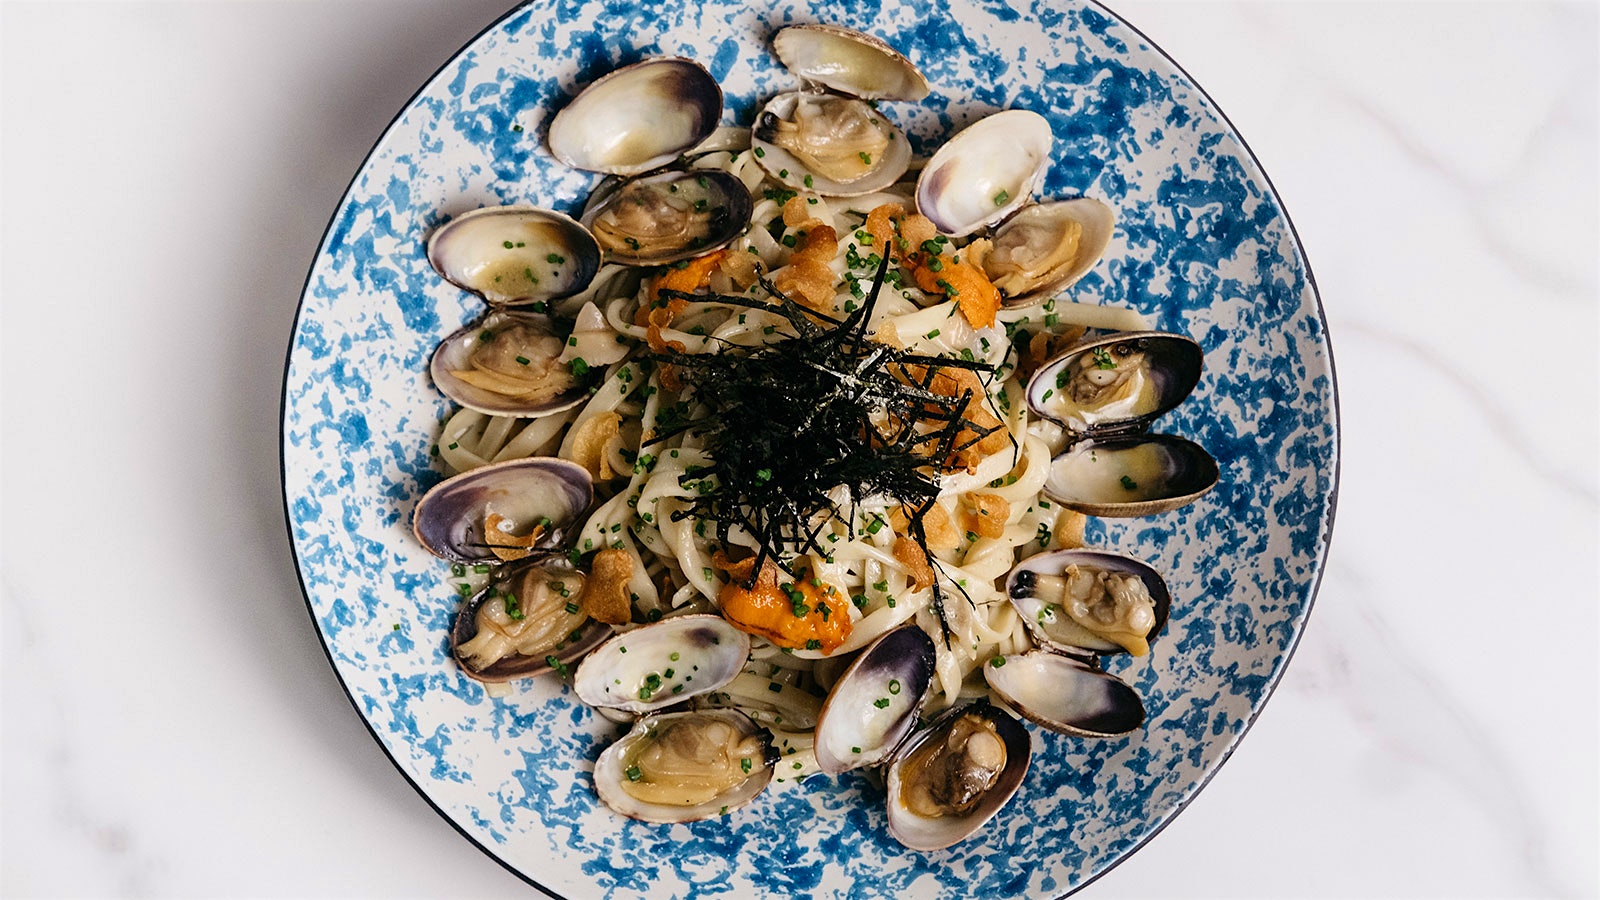  Blue-and-white plate holding spaghetti vongole